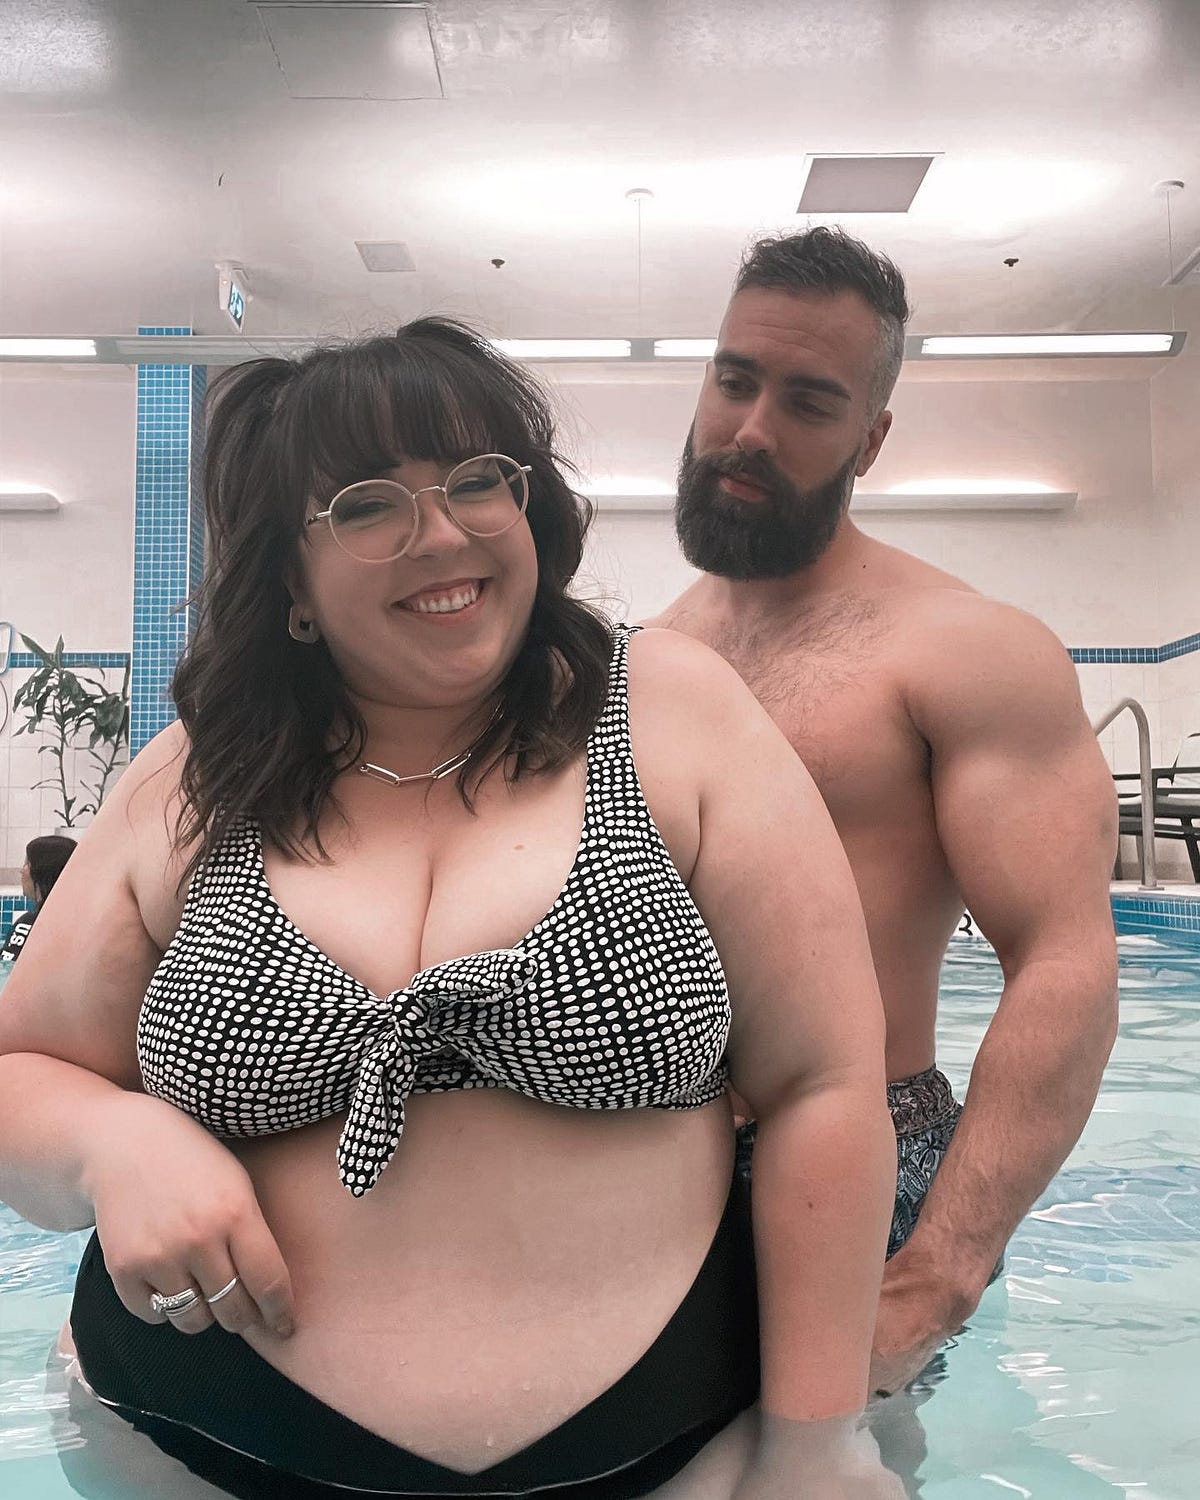 Fat Woman Married To A Fit Man, It Went Viral and People Are Losing Their Shit by Emma Colsey-Nicholls World Of Wellness Medium